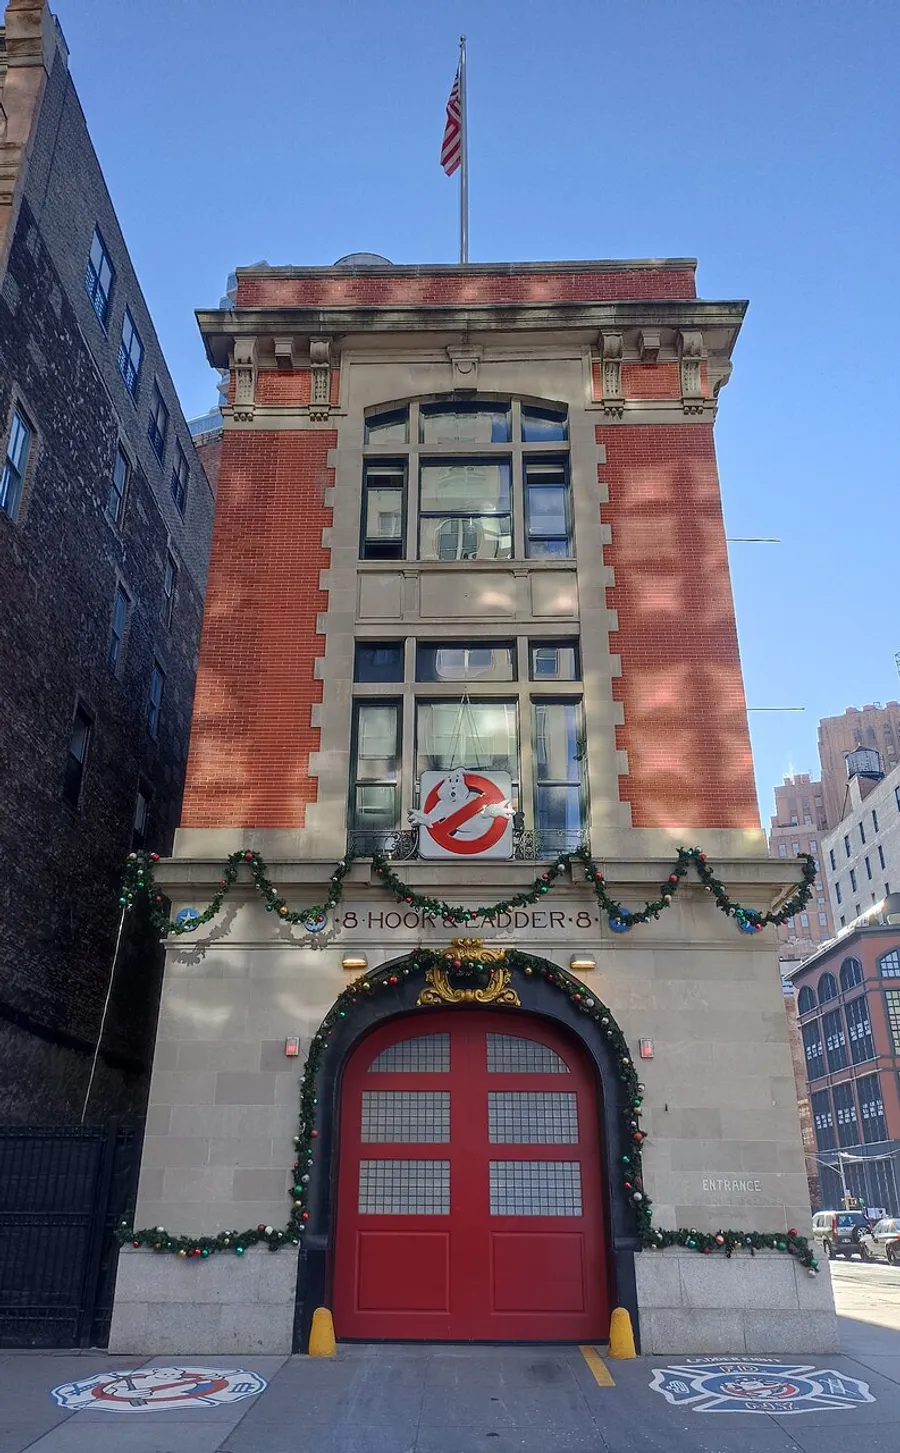 The image shows the exterior of a firehouse, adorned with Ghostbusters logo and holiday decorations, under a clear blue sky.